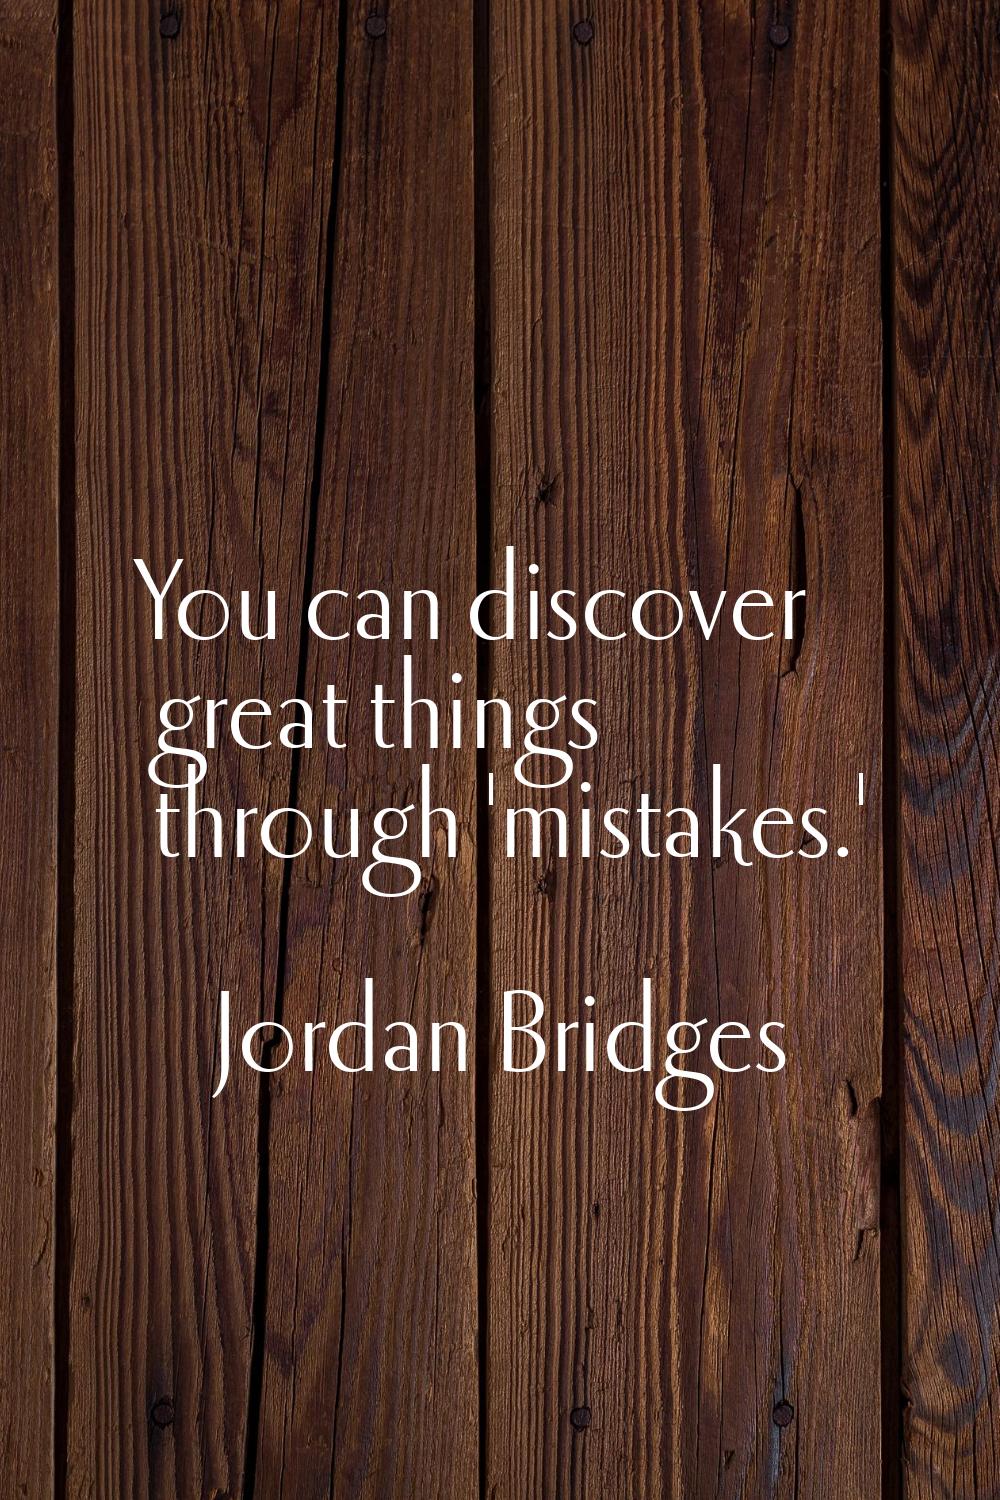 You can discover great things through 'mistakes.'